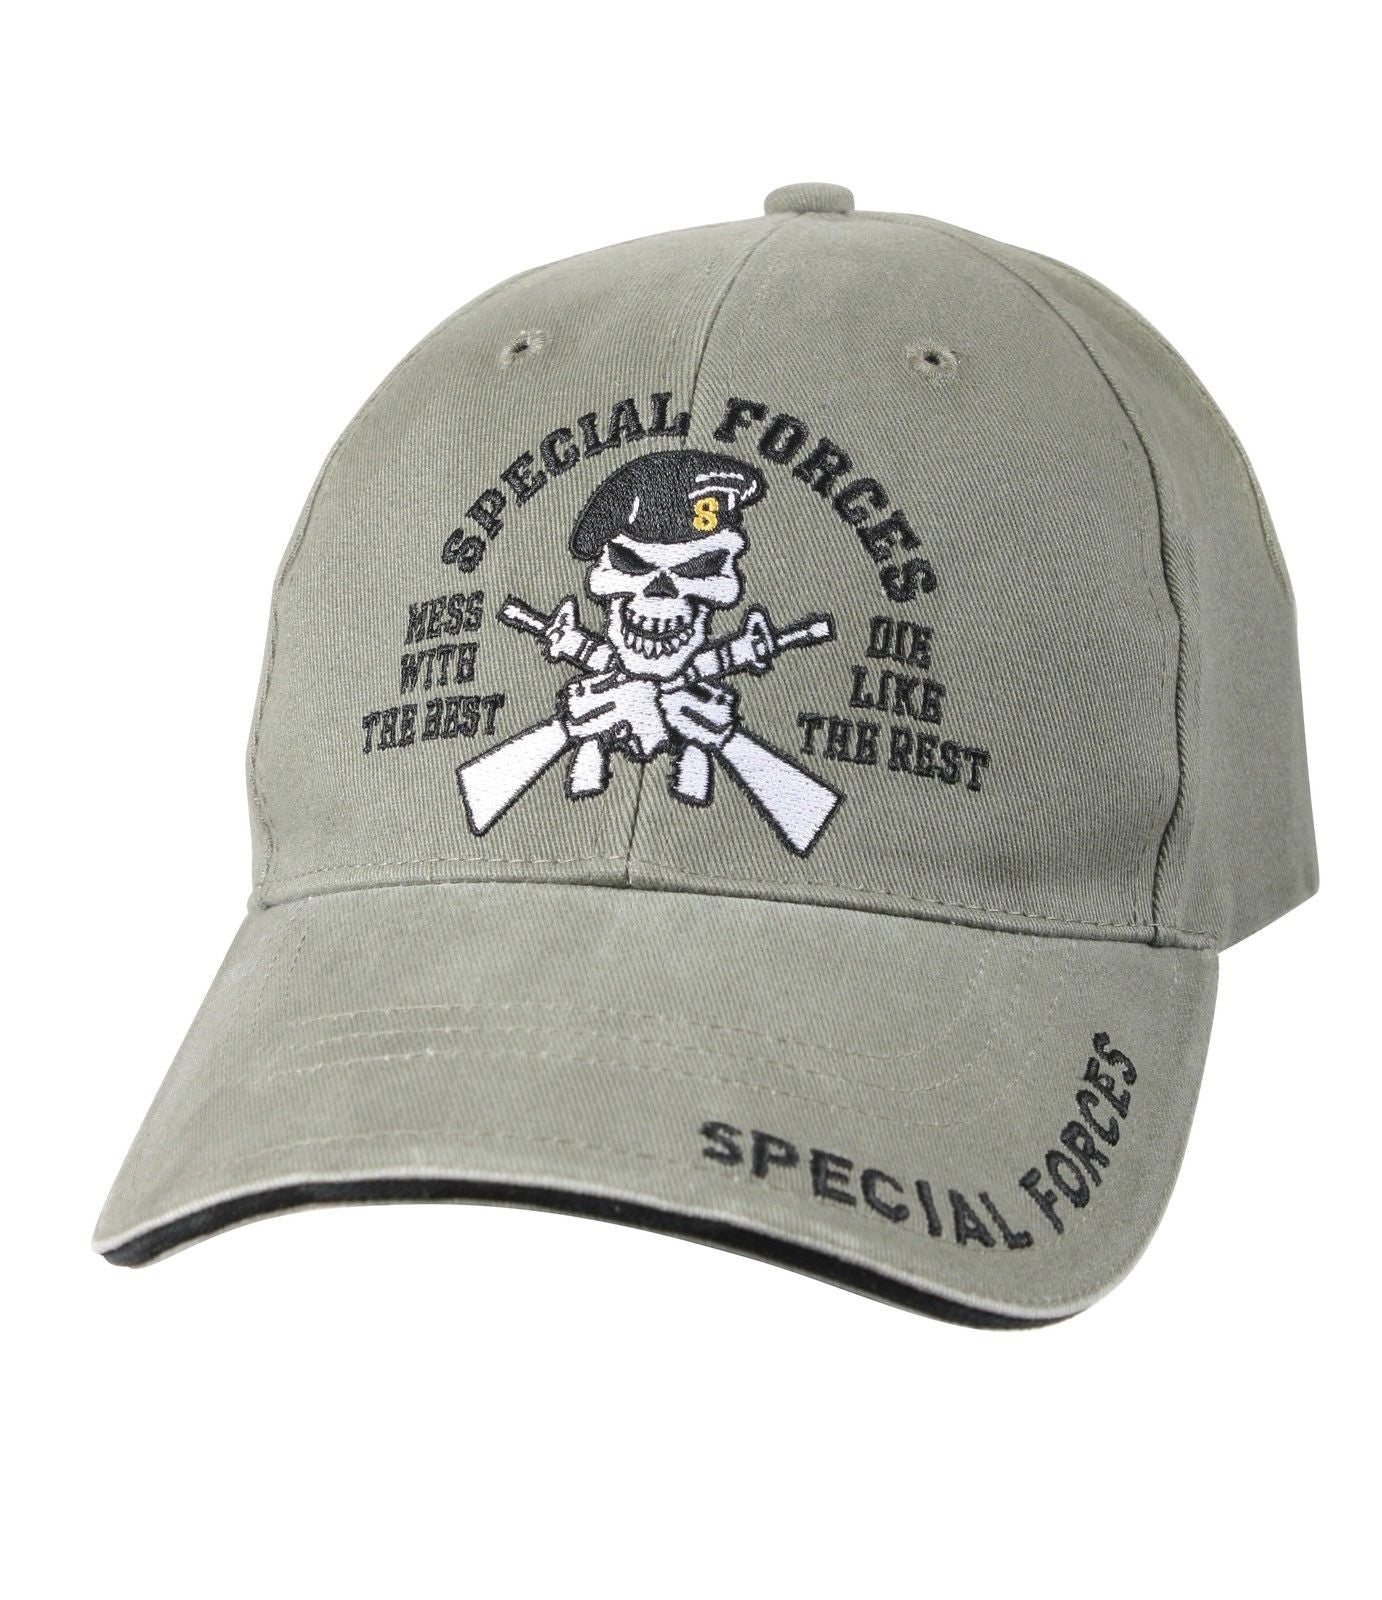 Vintage Low Pro 'Special Forces - Mess With the Best' Hat